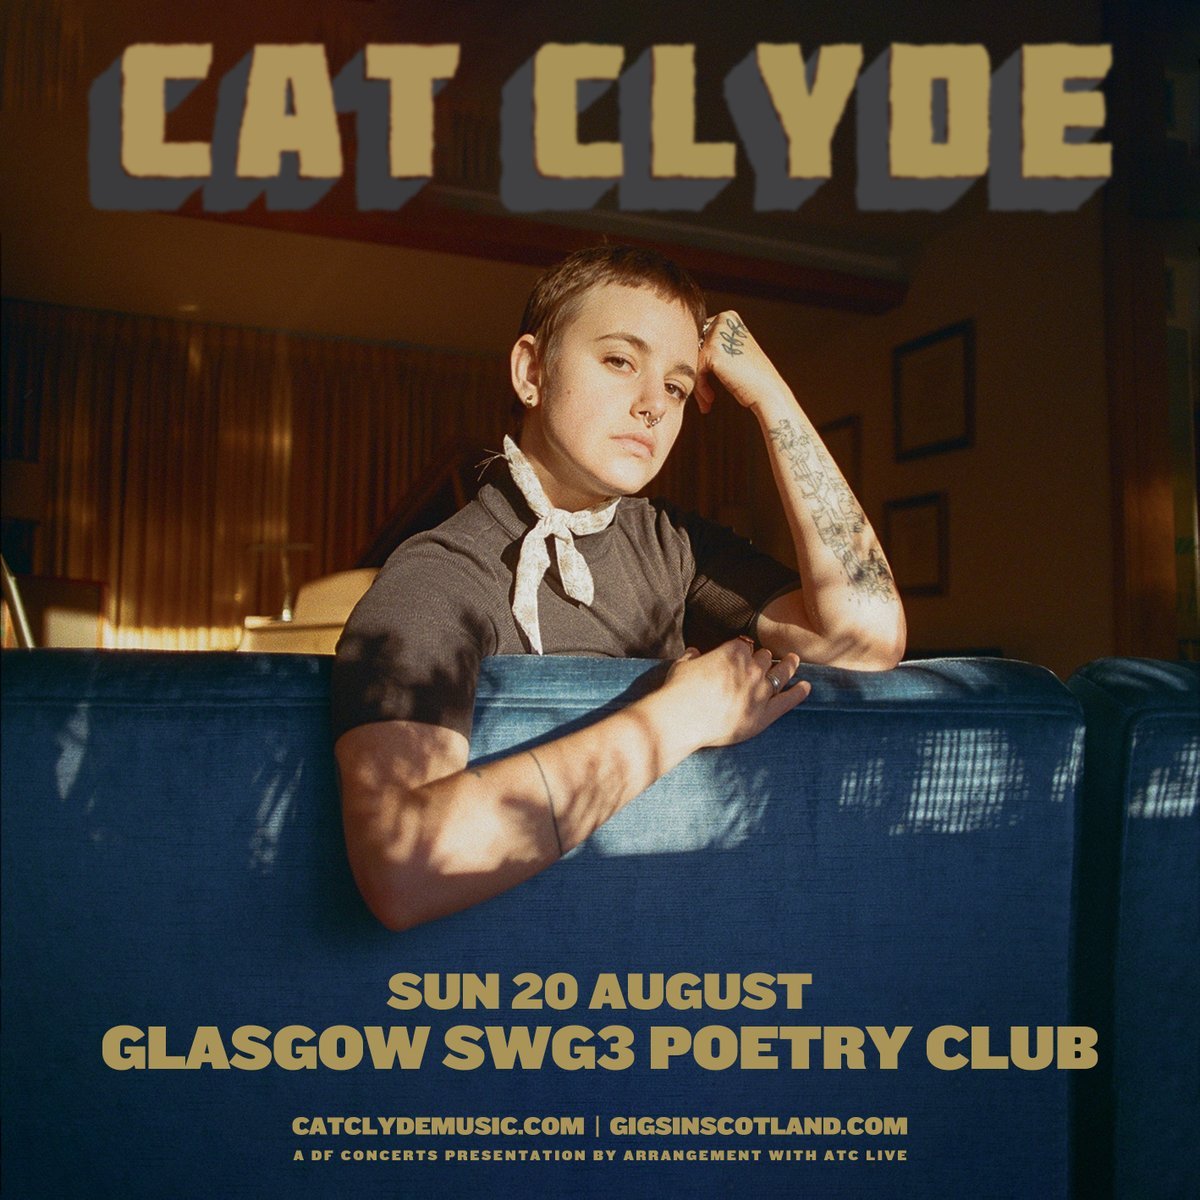 𝗝𝗨𝗦𝗧 𝗔𝗡𝗡𝗢𝗨𝗡𝗖𝗘𝗗 @CatClyde is headlining the Poetry Club on Sunday 20th August. 𝗧𝗜𝗖𝗞𝗘𝗧𝗦 on sale tomorrow at 10am.